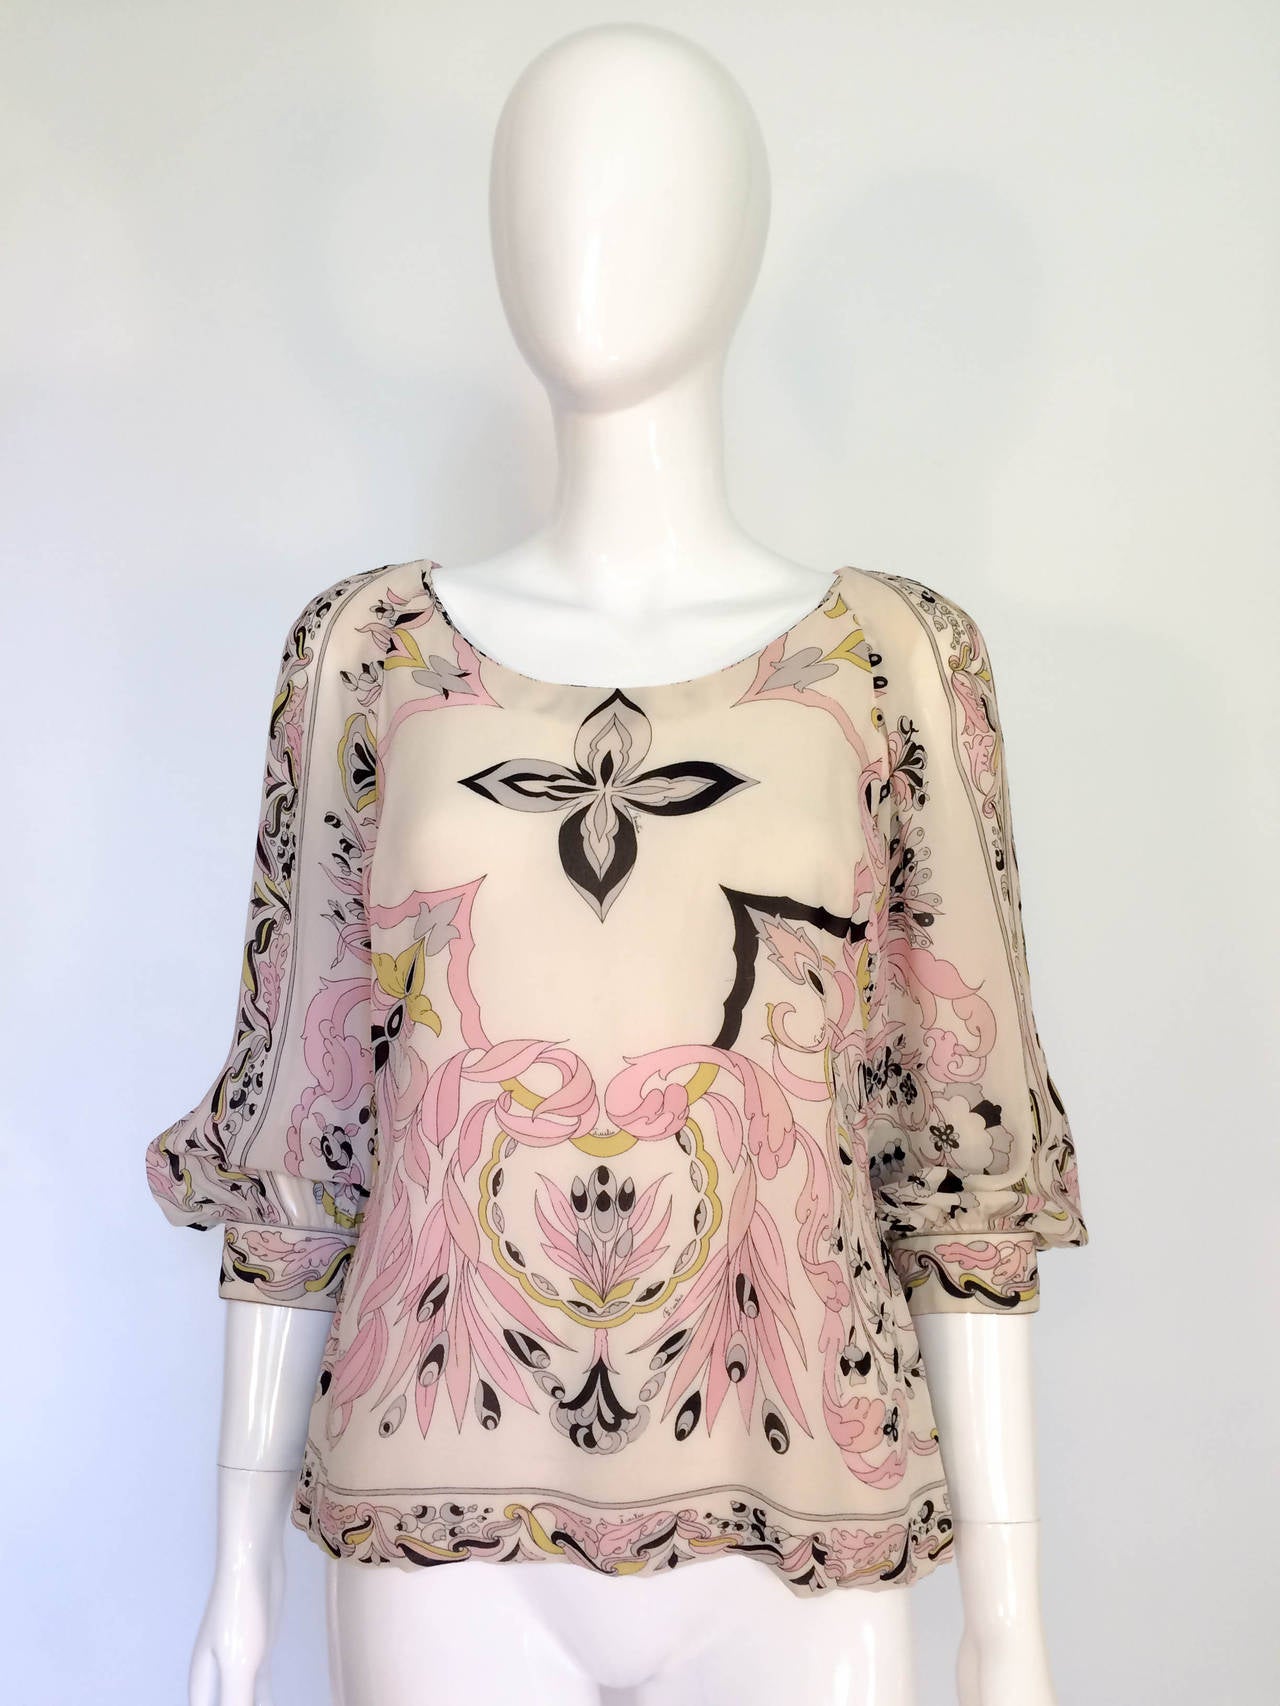 Emilio Pucci Silk Blouse - 1960s at 1stdibs